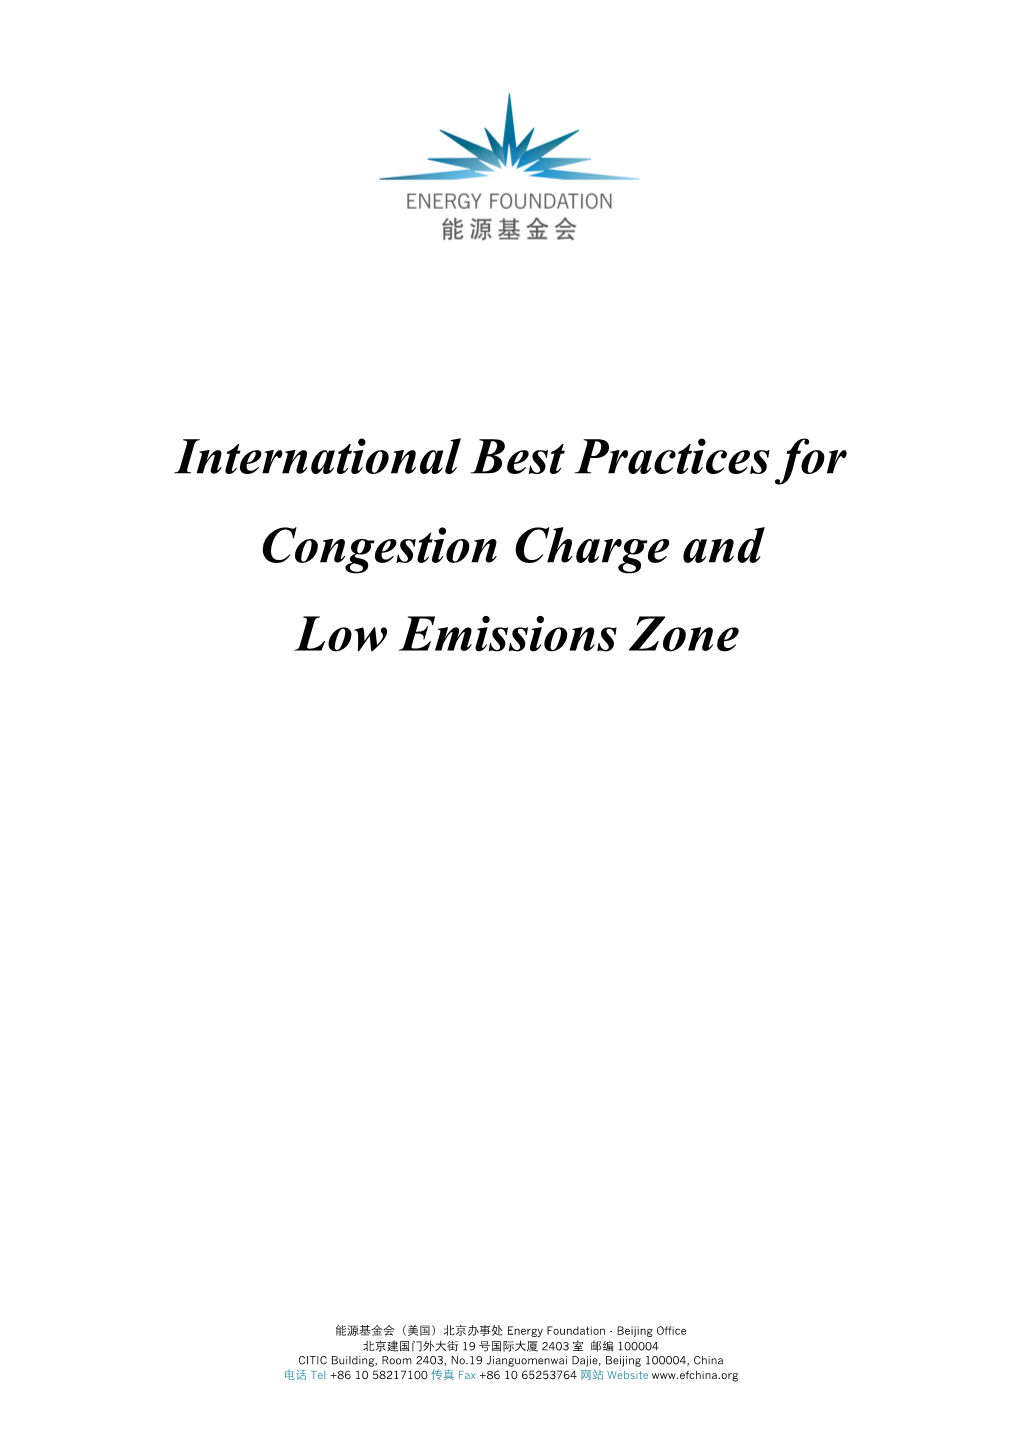 International Best Practices for Congestion Charge and Low Emissions Zone